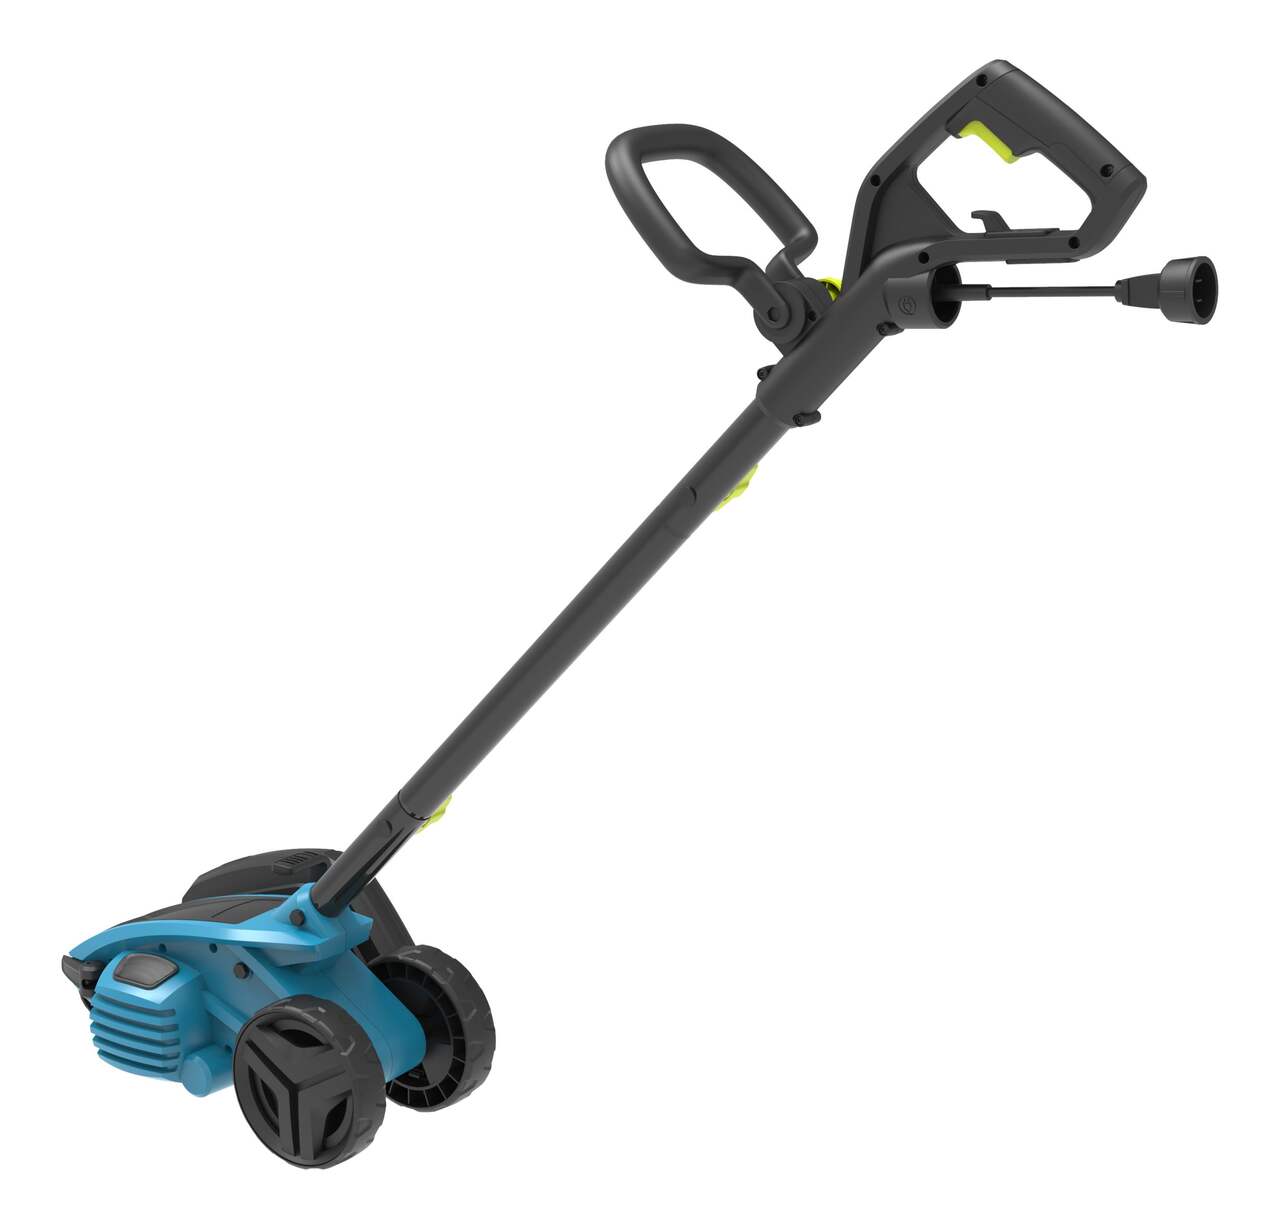 https://media-www.canadiantire.ca/product/seasonal-gardening/outdoor-tools/chore-performer/0601900/yardworks-12a-edger--352d08d1-1ea9-426d-aa82-037f8c56d66b-jpgrendition.jpg?imdensity=1&imwidth=1244&impolicy=mZoom